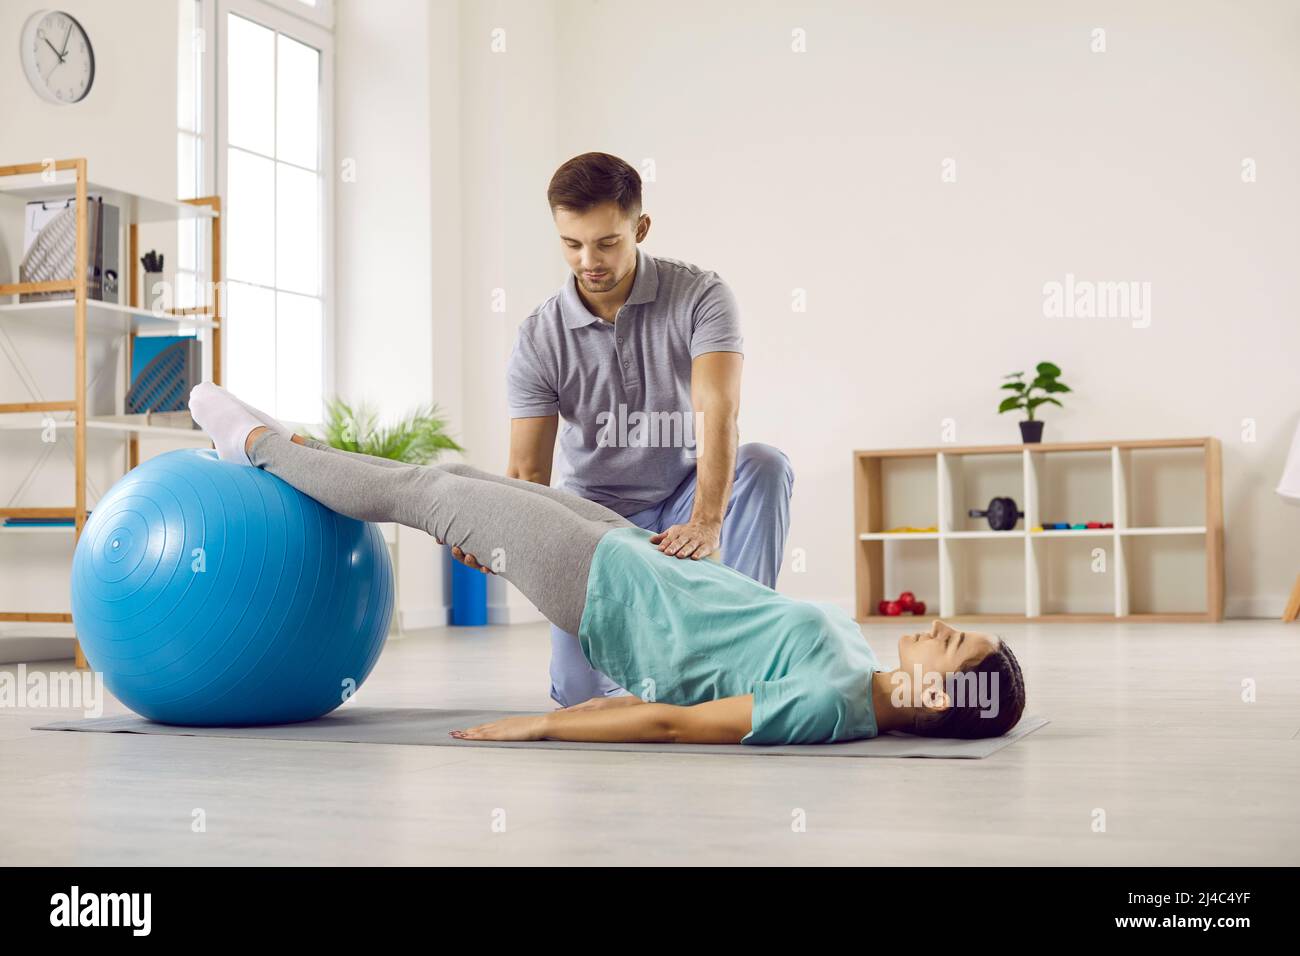 Physiotherapist helping his patient do physical rehabilitation exercises with fit ball Stock Photo